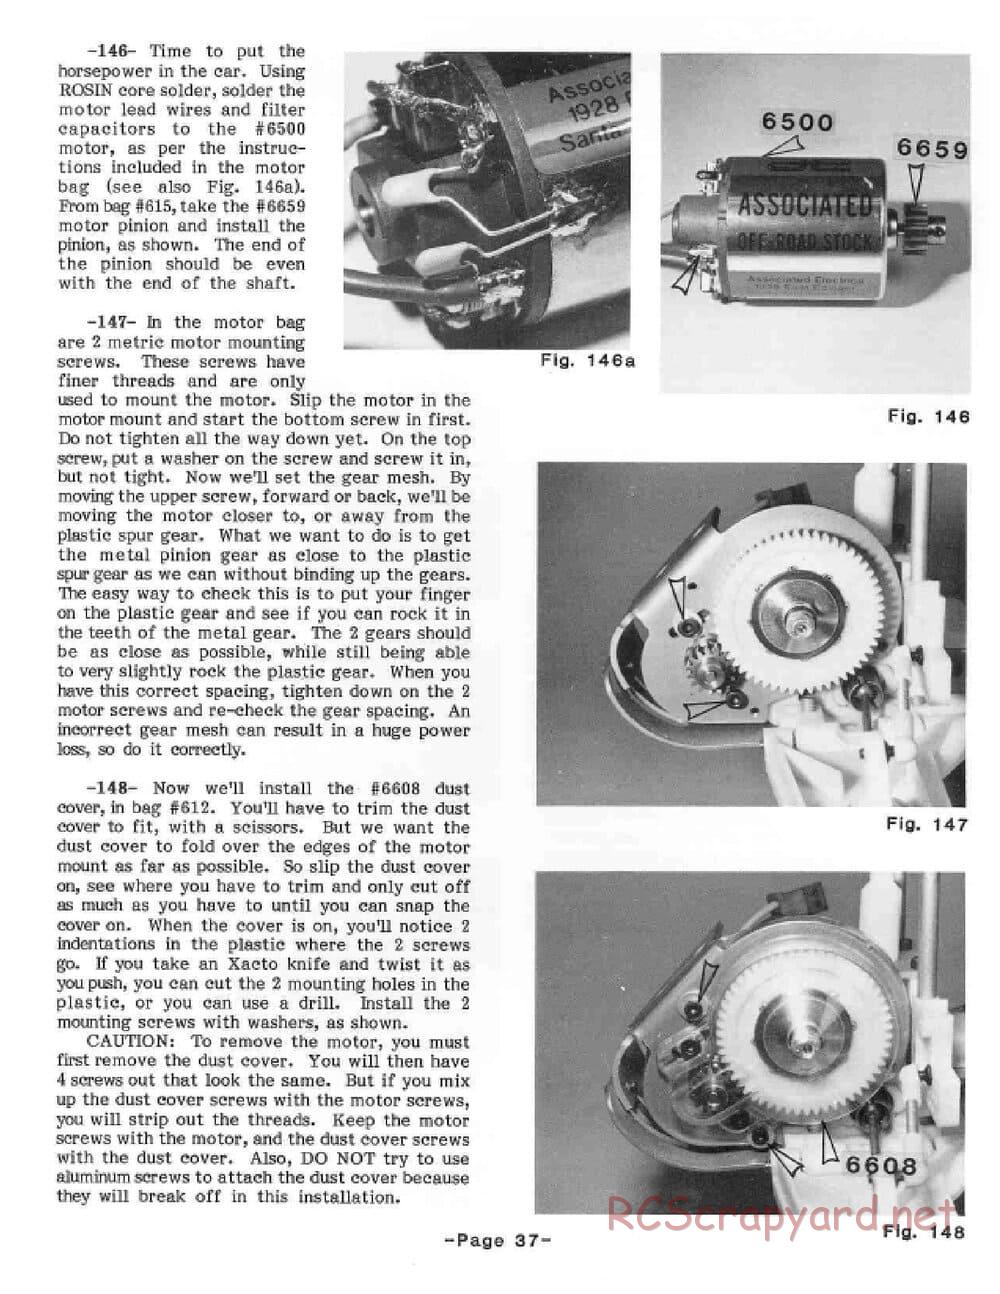 Team Associated - RC10 - 1986 Cadillac Manual - Page 39